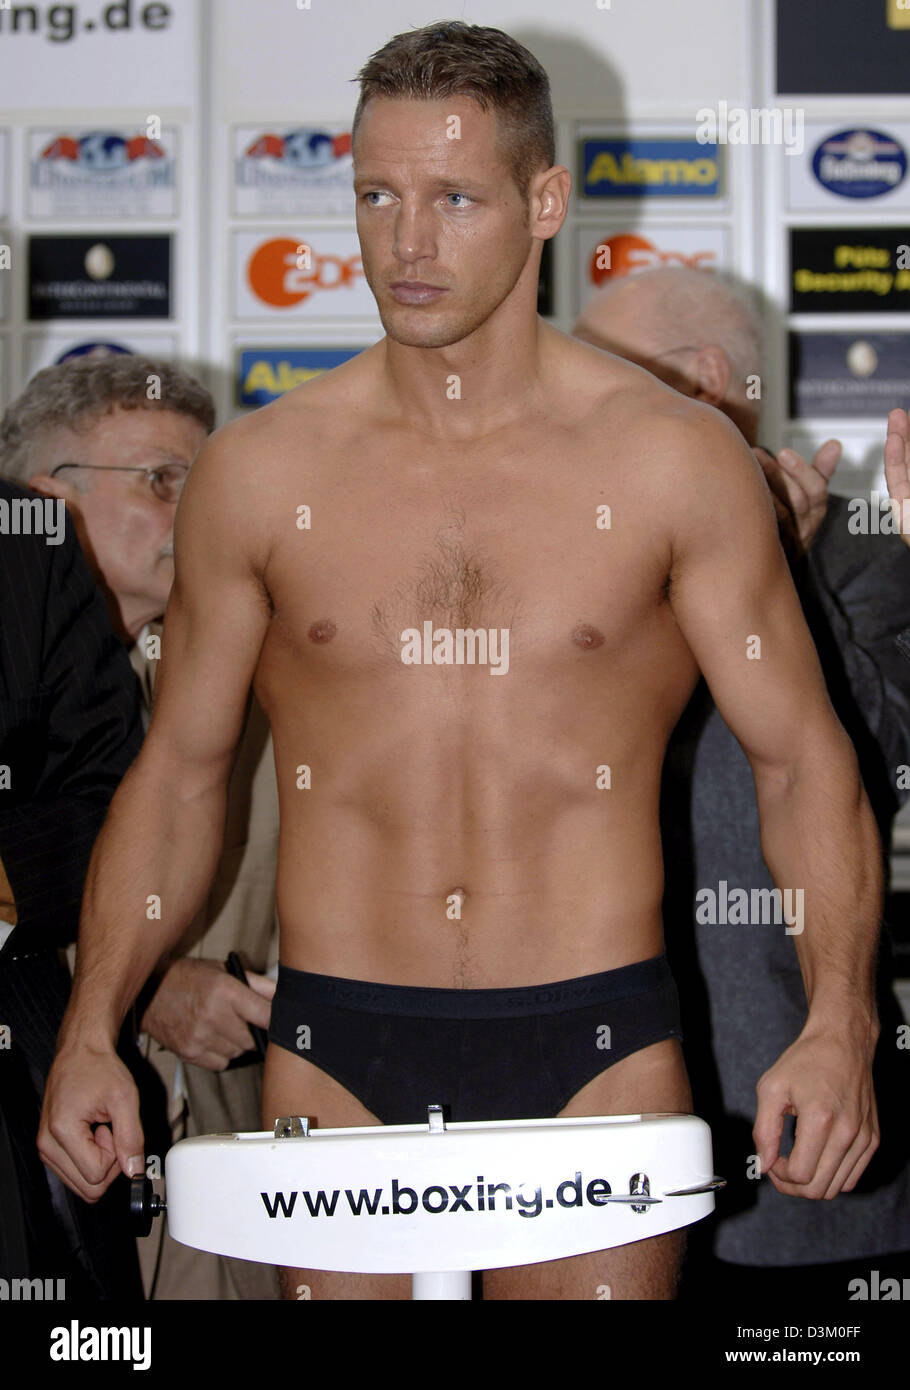 (dpa) - Cruiser weight boxer Thomas Ulrich stands on the scale during the official weighing in Duesseldorf, Germany, Friday, 14 August 2005. Ulrich prepared to fight his opponent Polish boxing pro Tomasz Adamek for the WBC world champion title bout in cruiser weight boxing, which is going to take place on Saturday, 15 October 2005. Photo: Achim Scheidemann Stock Photo